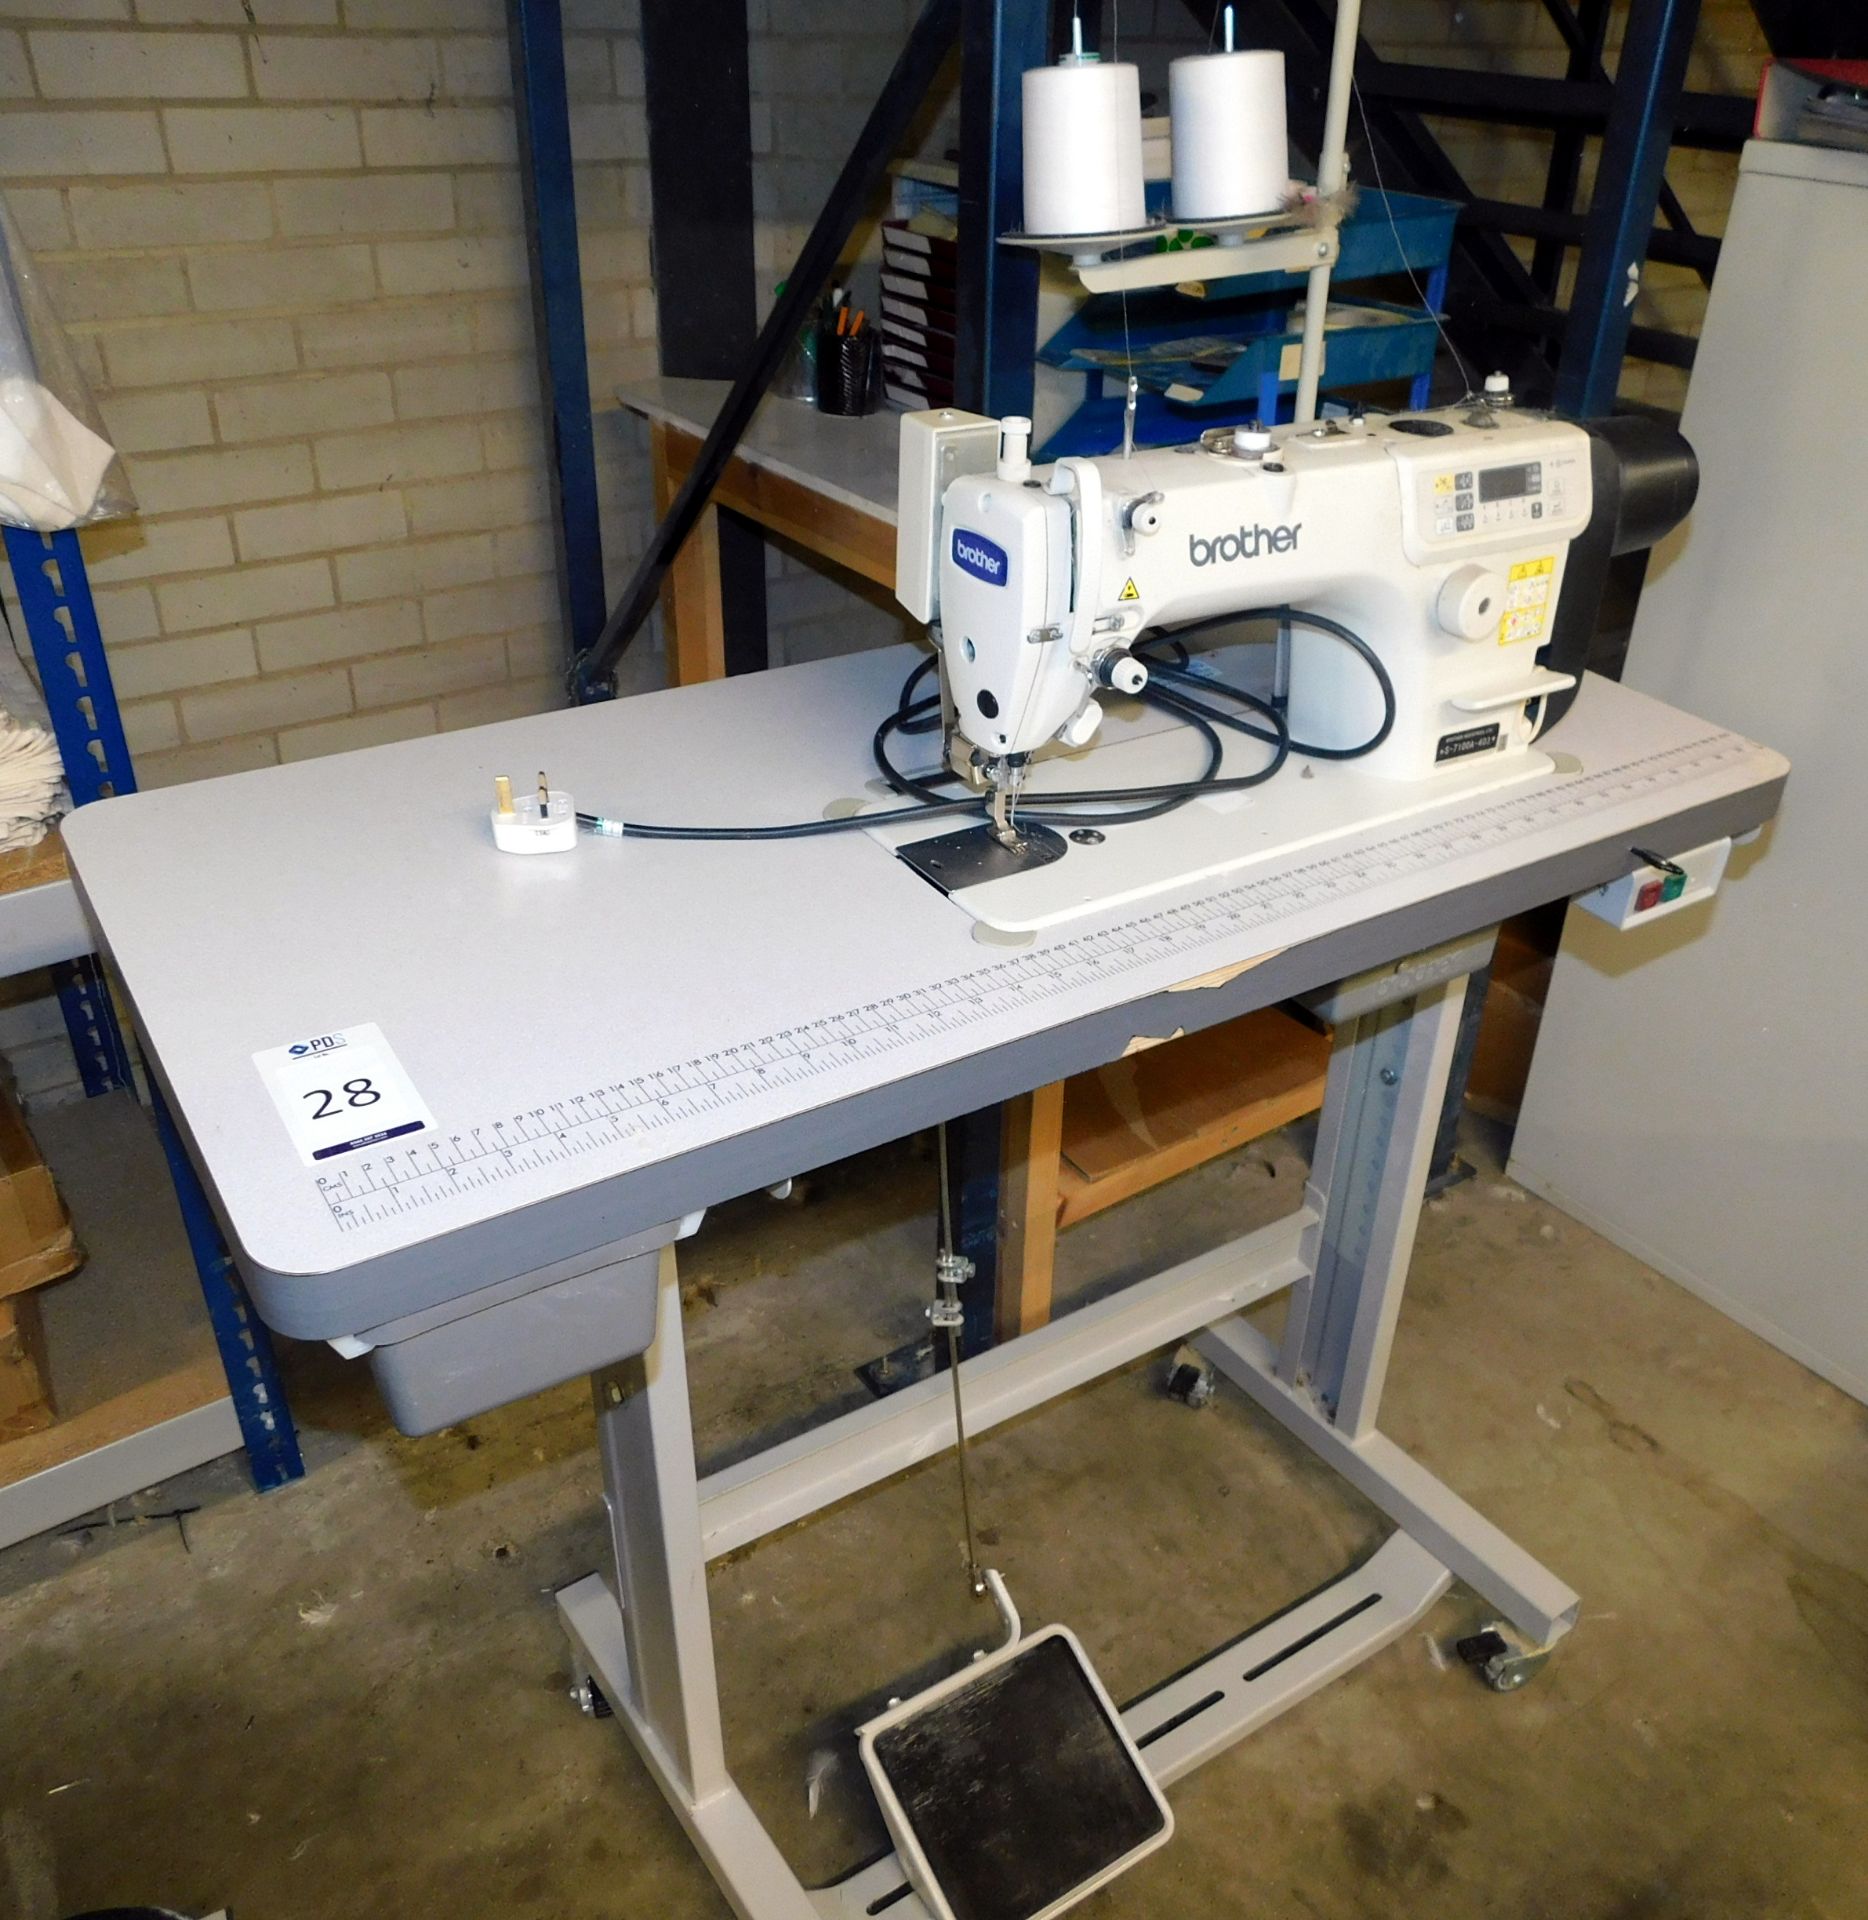 Brother S-7100A-403 Single Needle Lockstitch Machine, Serial Number E7820207 (Location Diss.